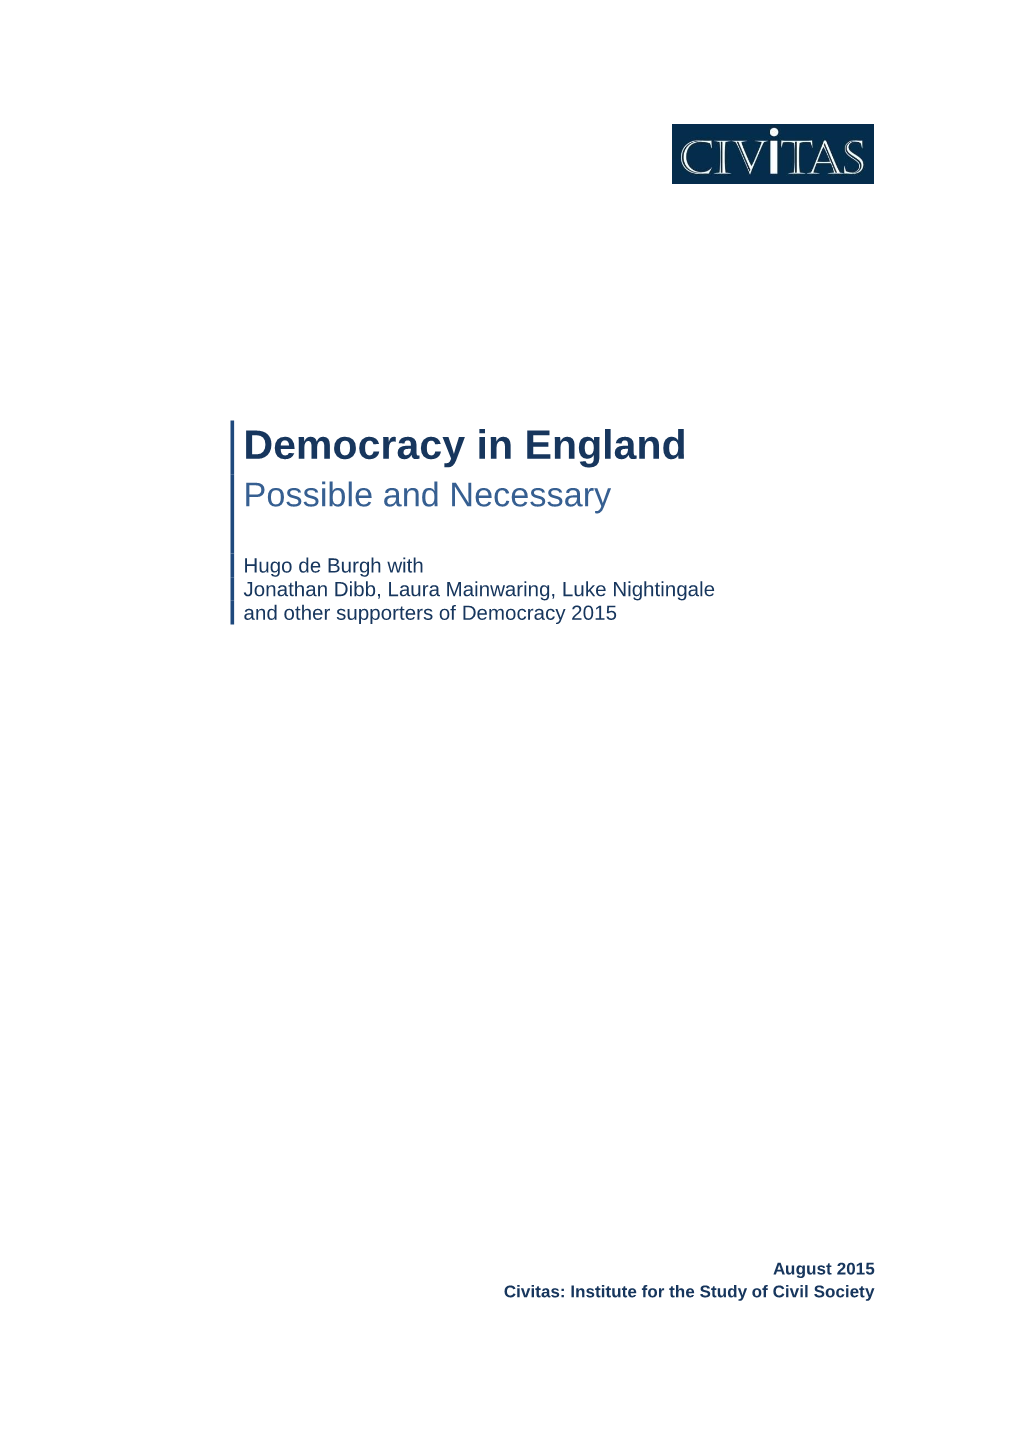 Democracy in England Possible and Necessary